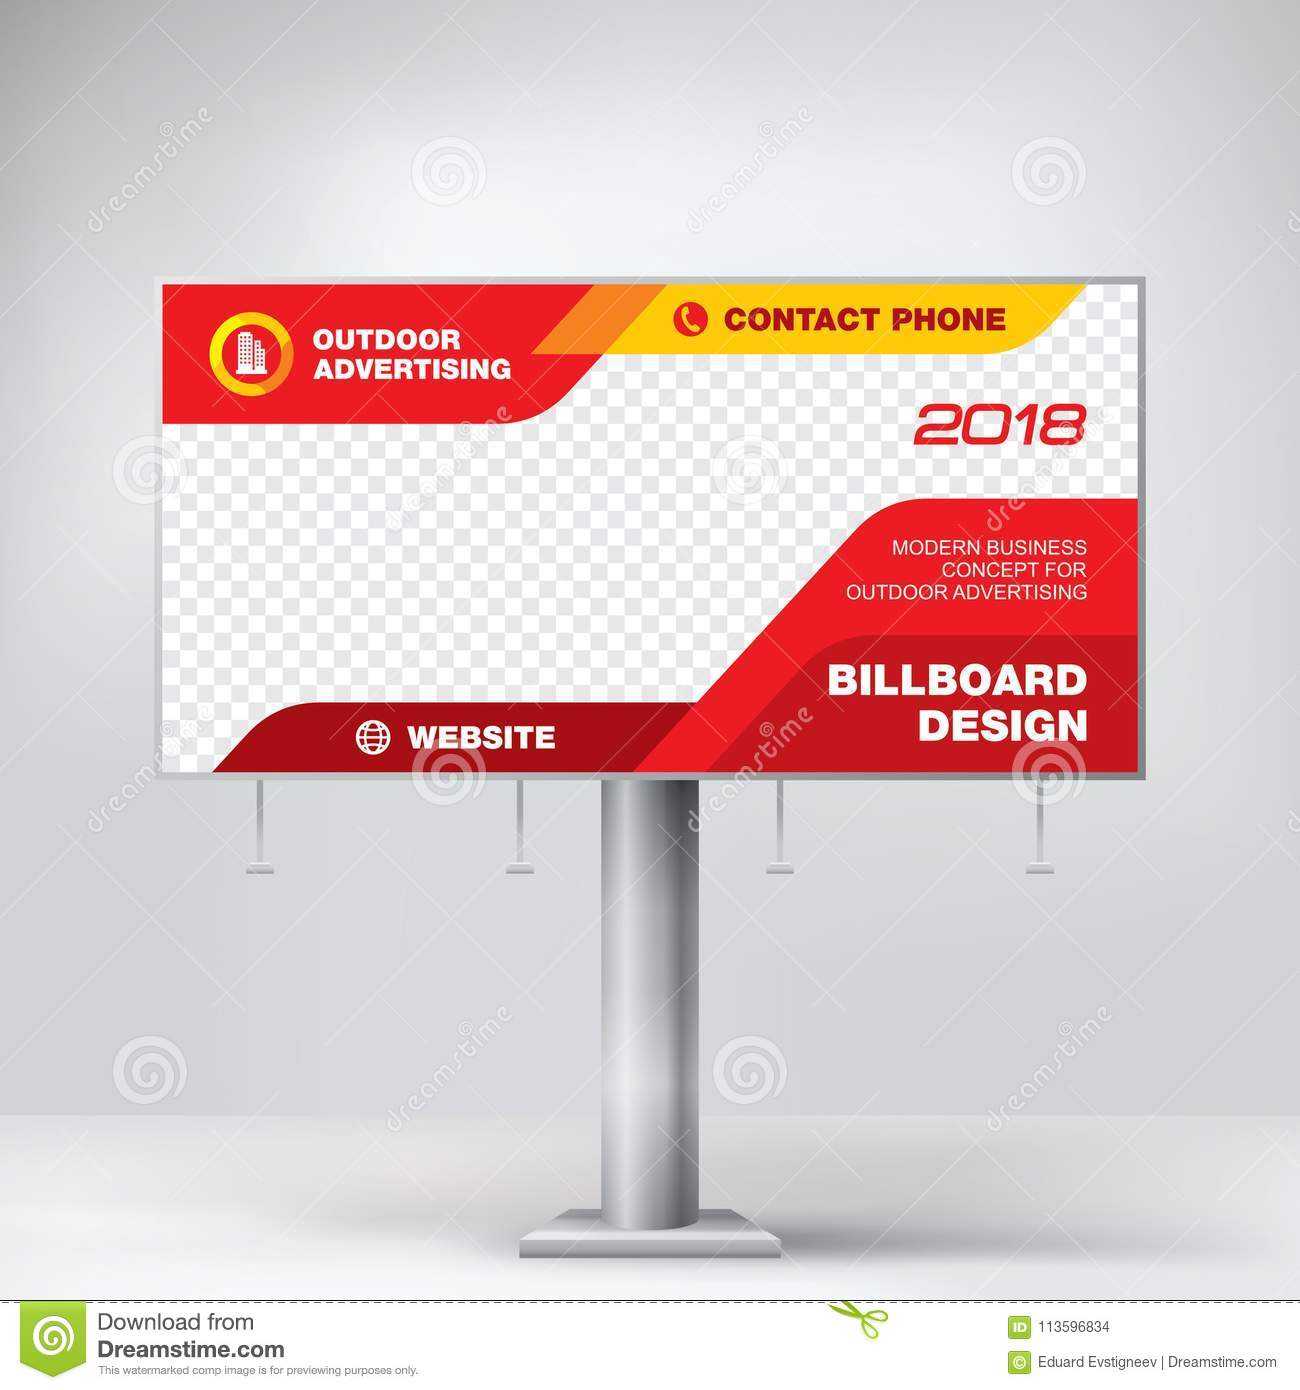 Billboard Design, Template Banner For Outdoor Advertising Pertaining To Outdoor Banner Design Templates